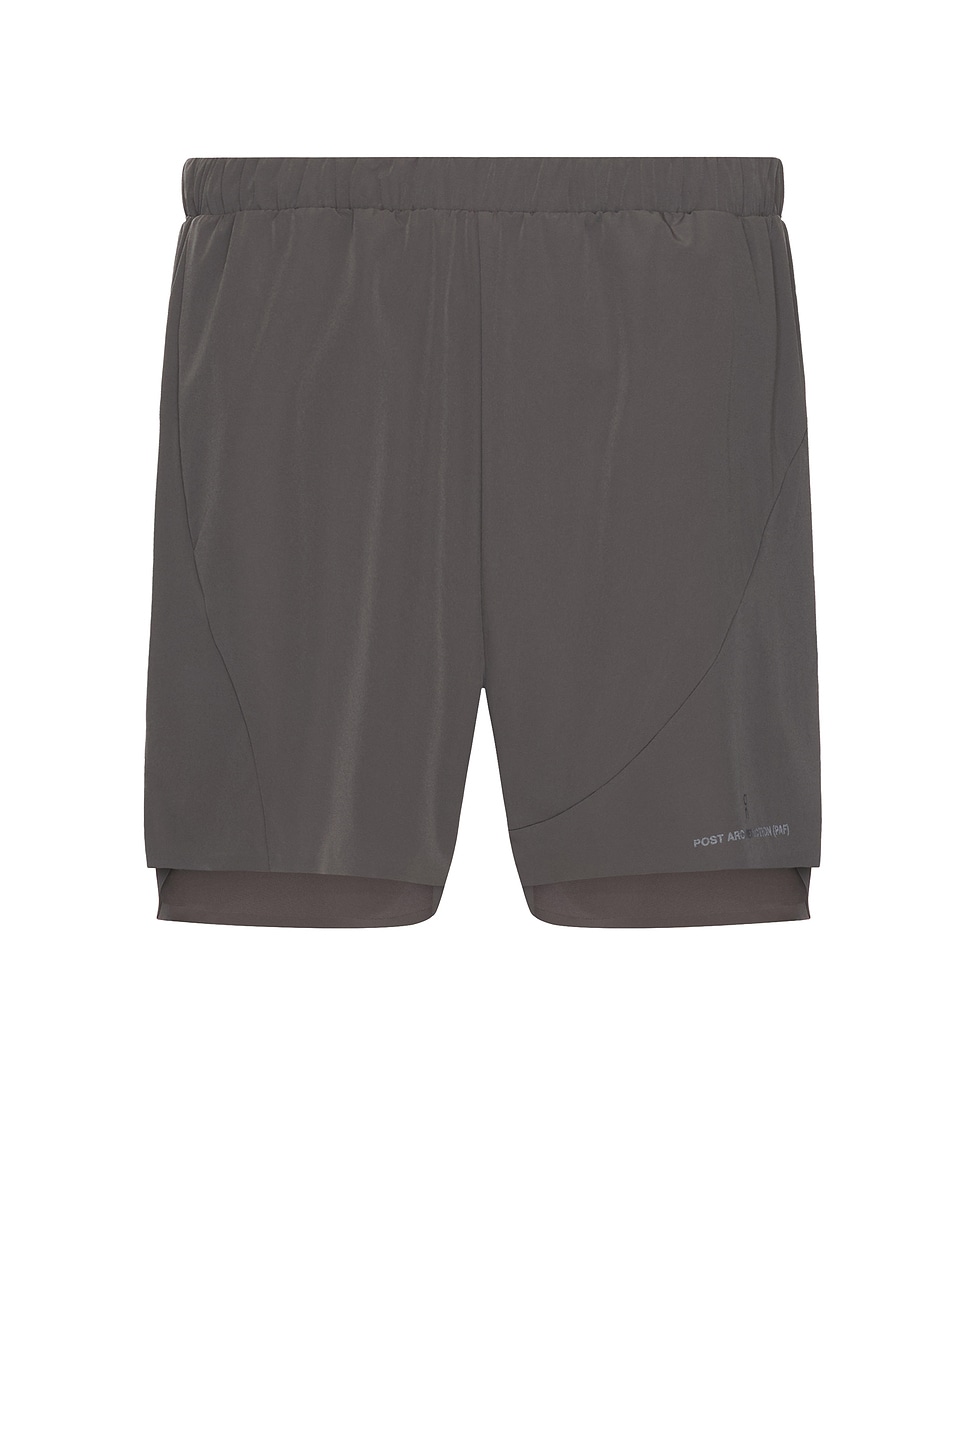 x Post Archive Faction (PAF) Shorts in Grey